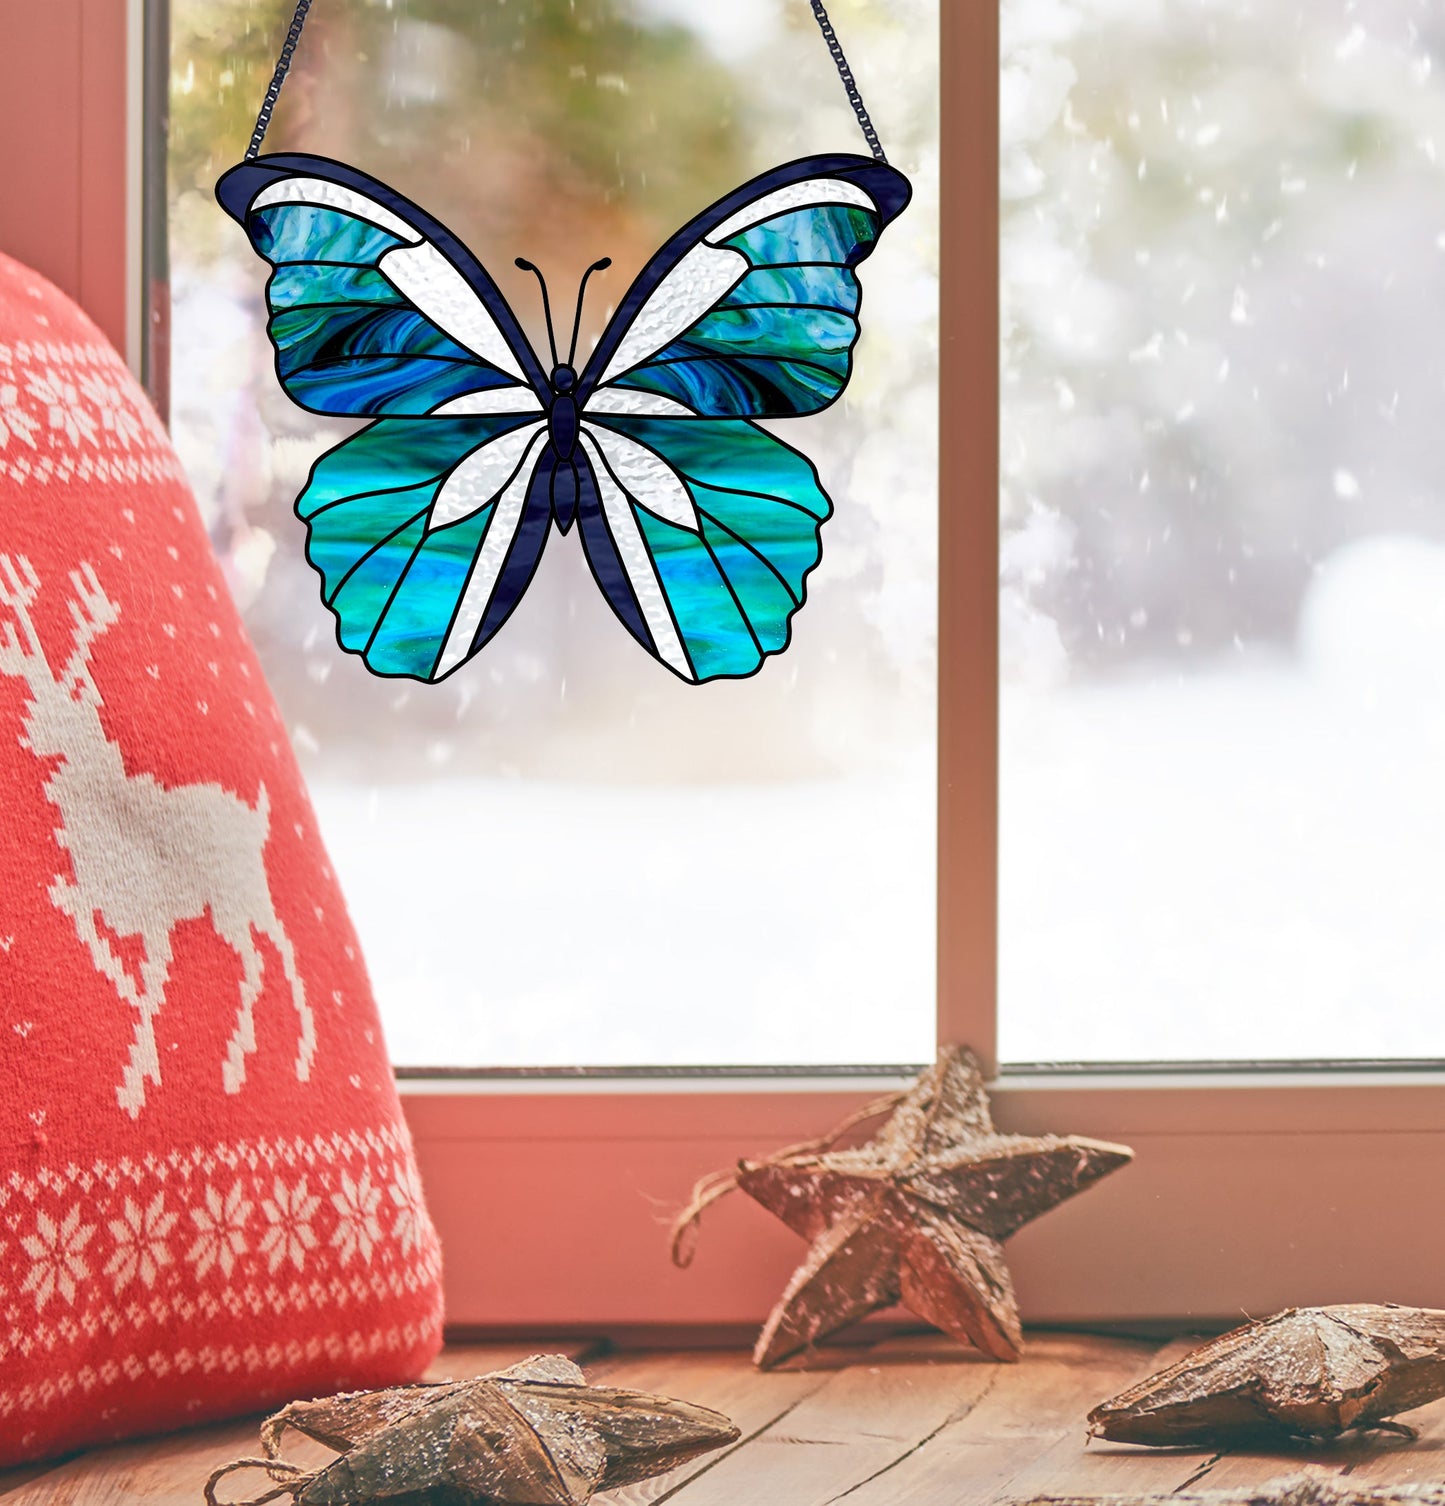 Butterfly stained glass patterns, pack of five, instant download, one butterfly shown in window with Christmas decorations